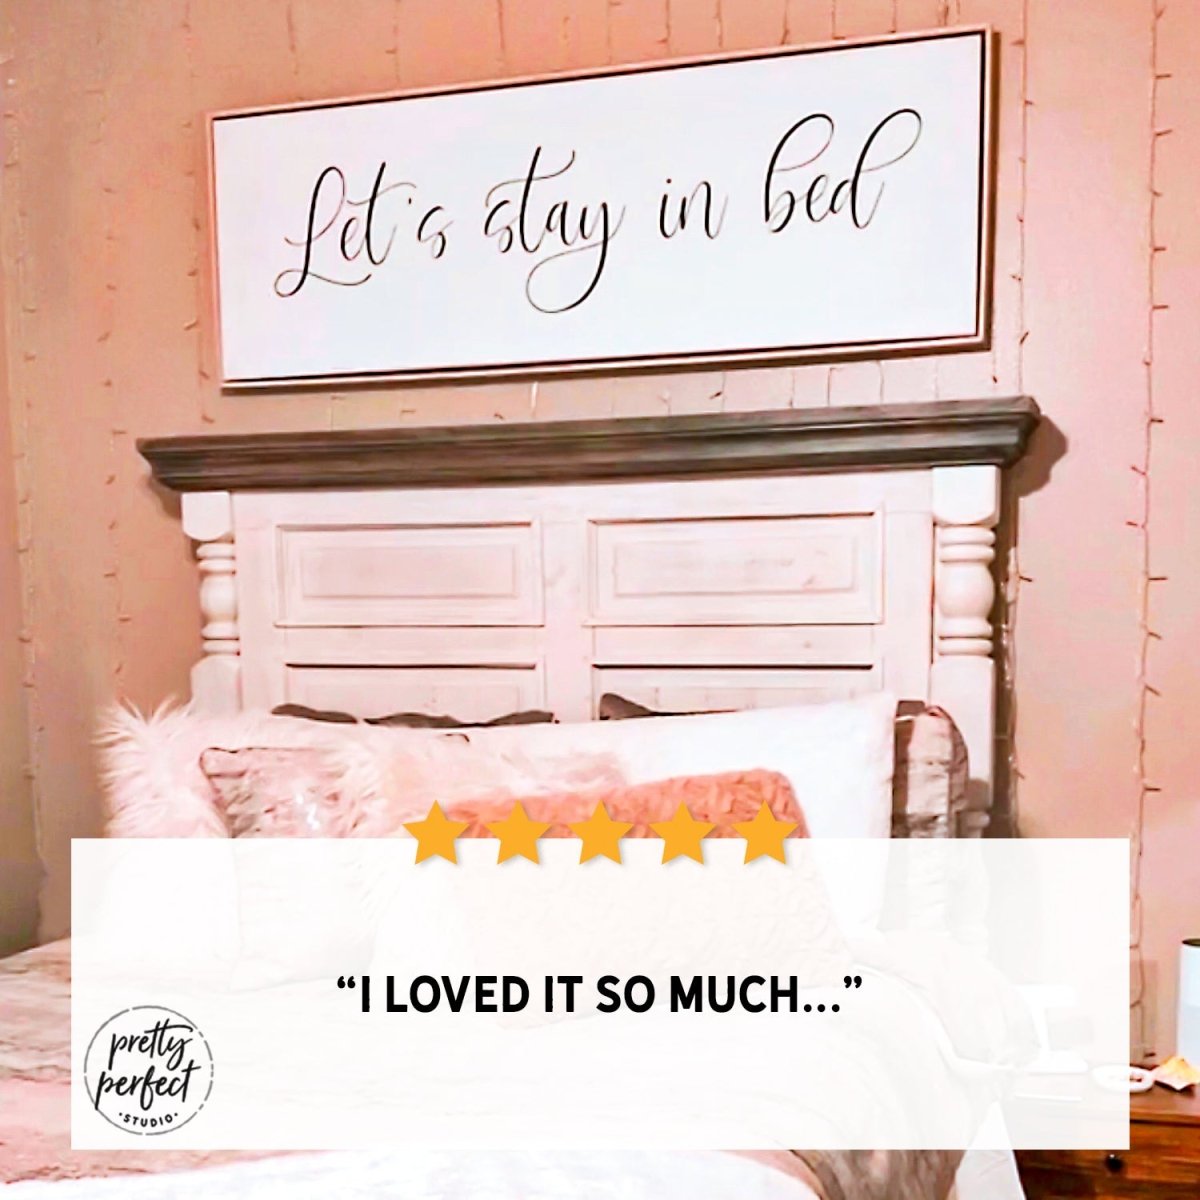 Customer product review for let's stay in bed wall art by Pretty Perfect Studio